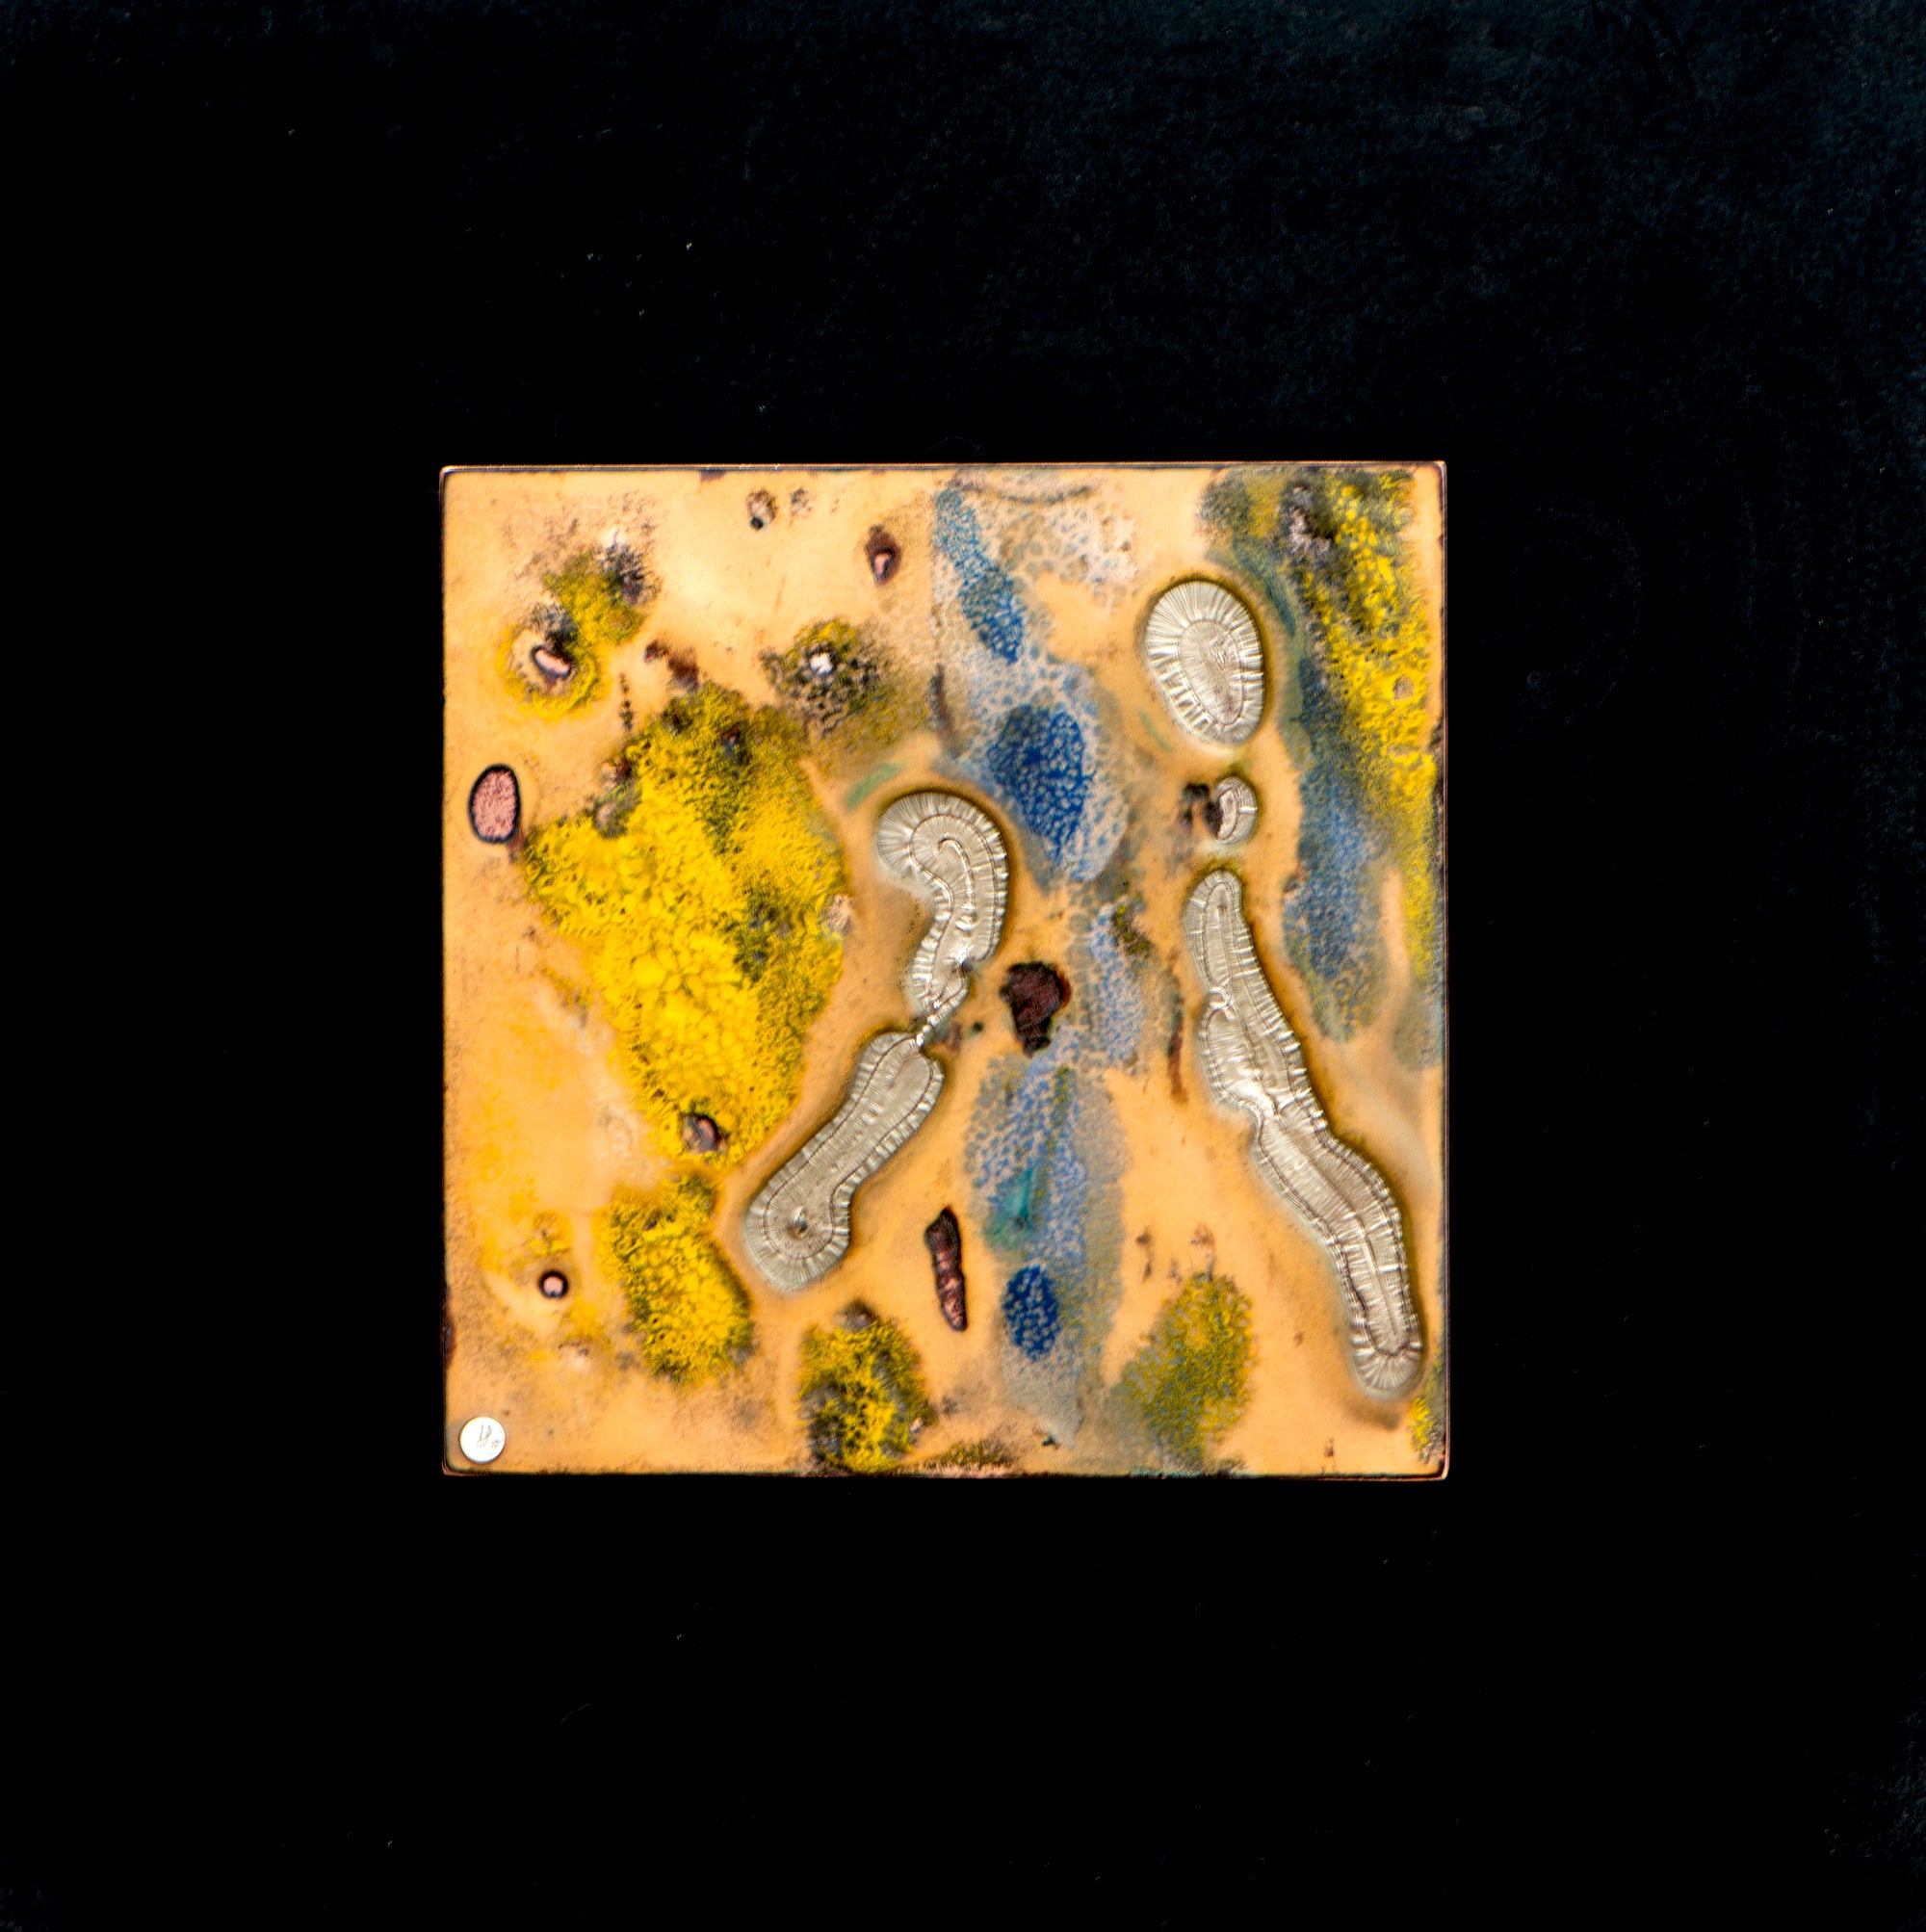 Conversations,  Enamel on copper panel with eutectic fired fine silver